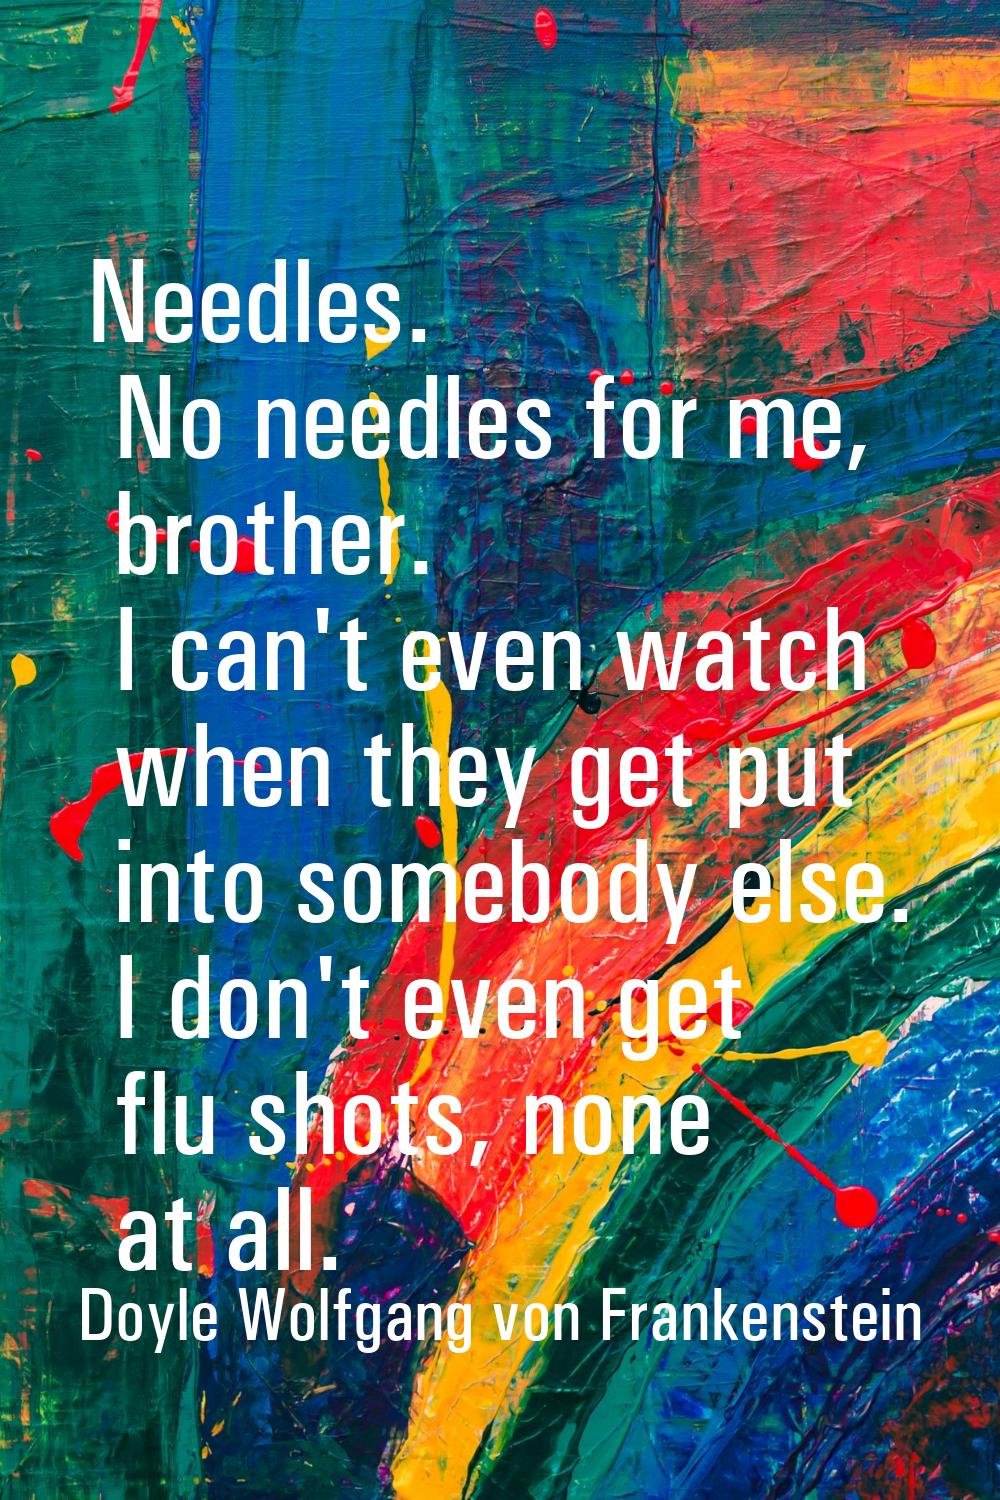 Needles. No needles for me, brother. I can't even watch when they get put into somebody else. I don